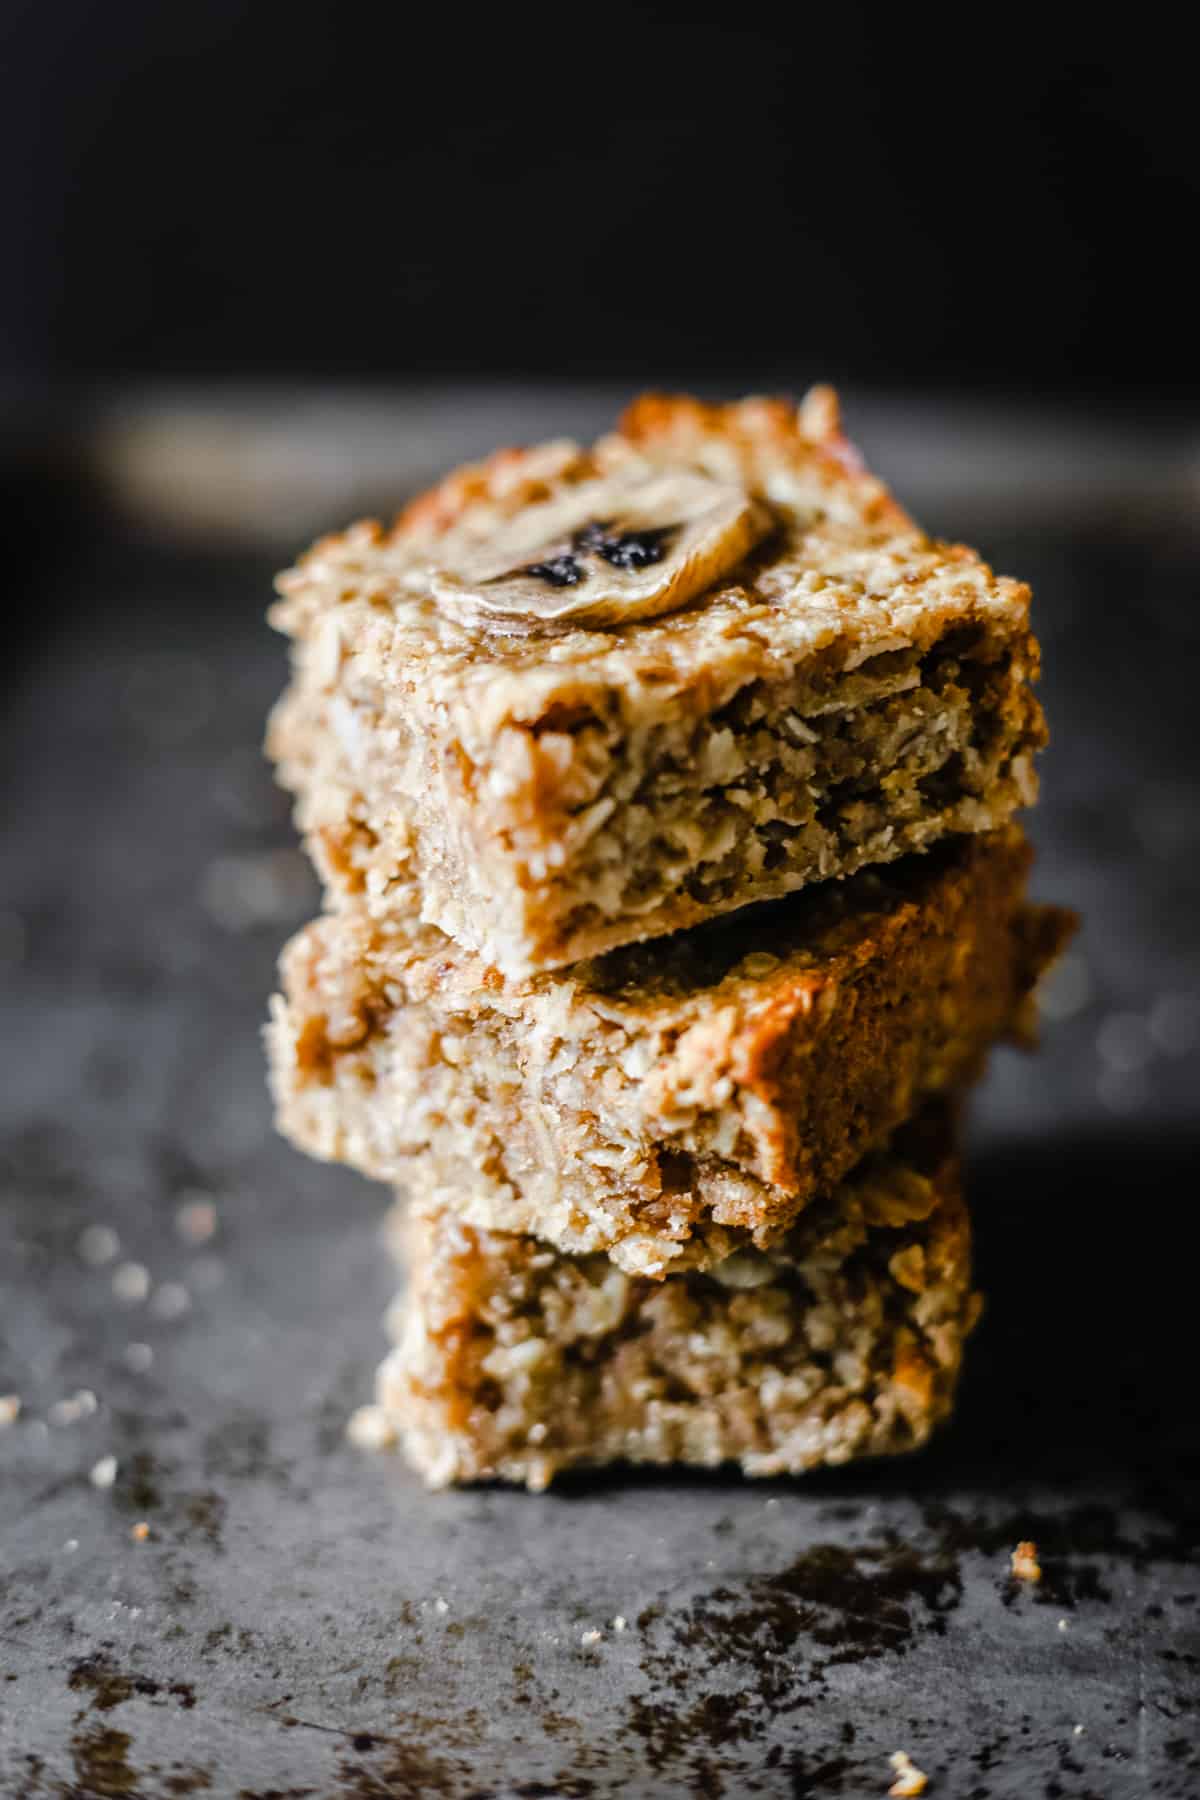 These Salted Date Caramel Banana Flapjacks are refined sugar-free and gluten-free for guilt-free snacking.